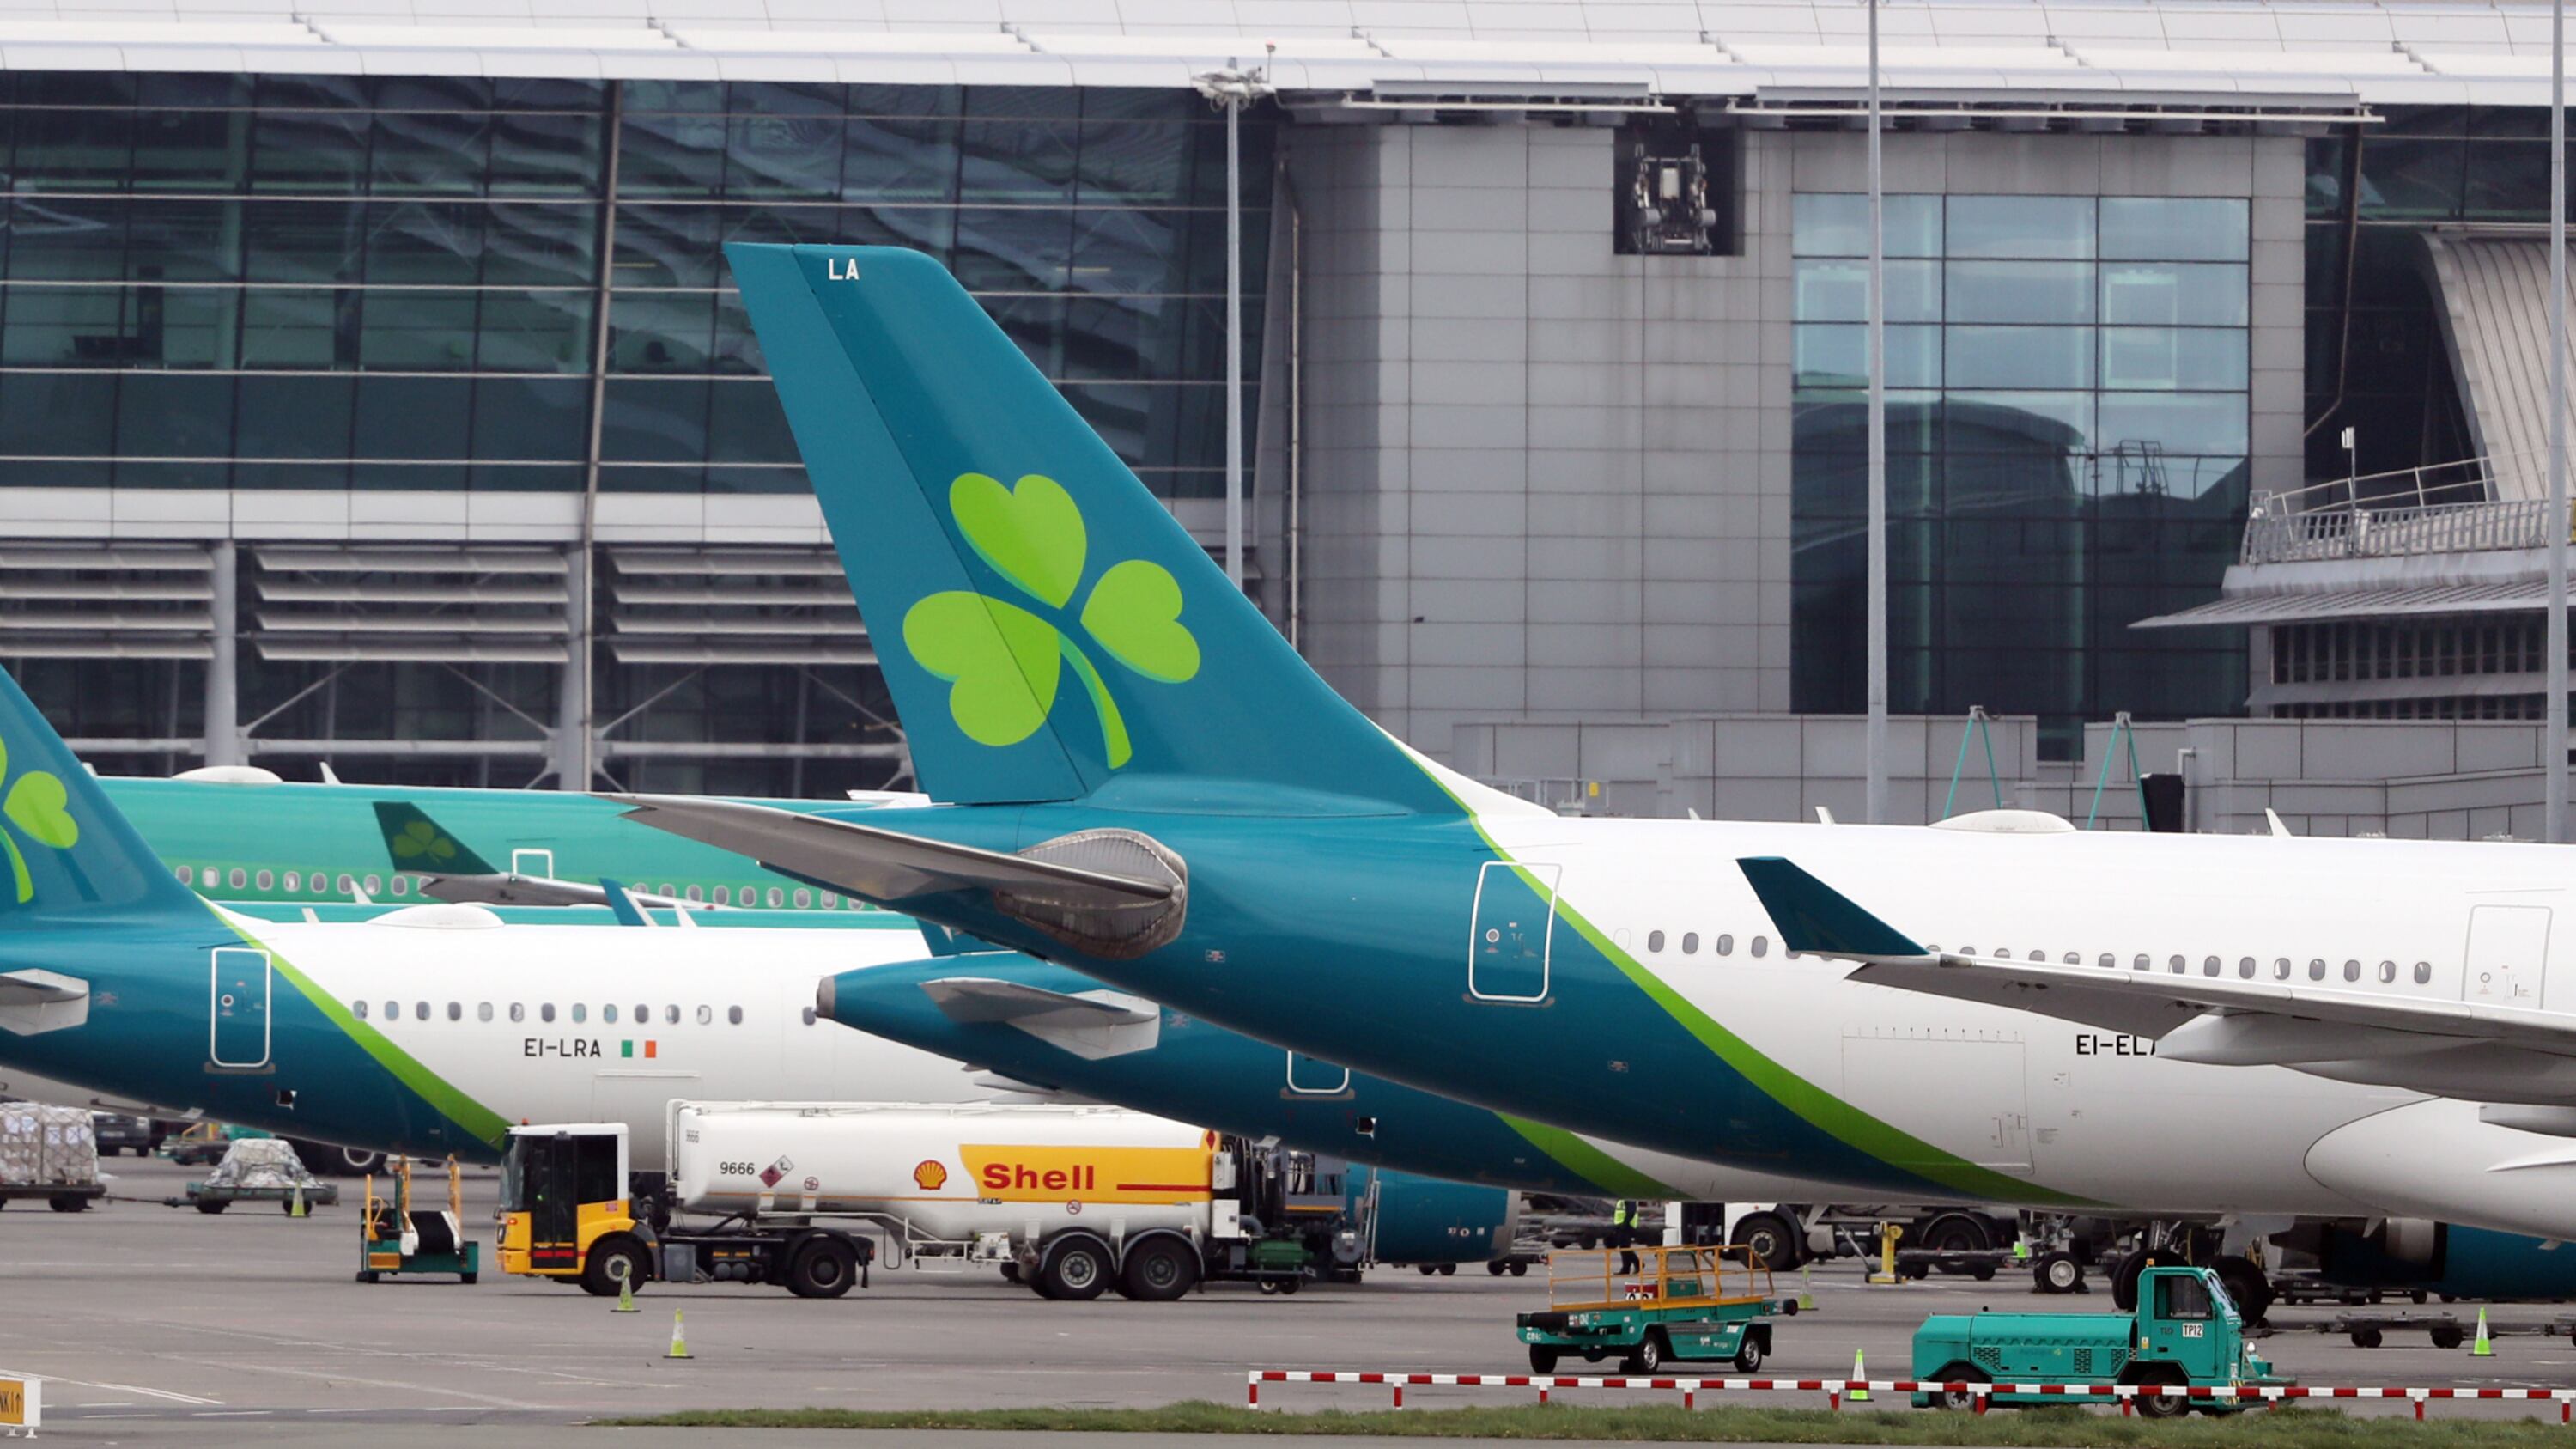 Aer Lingus has confirmed it is to cancel 120 flights